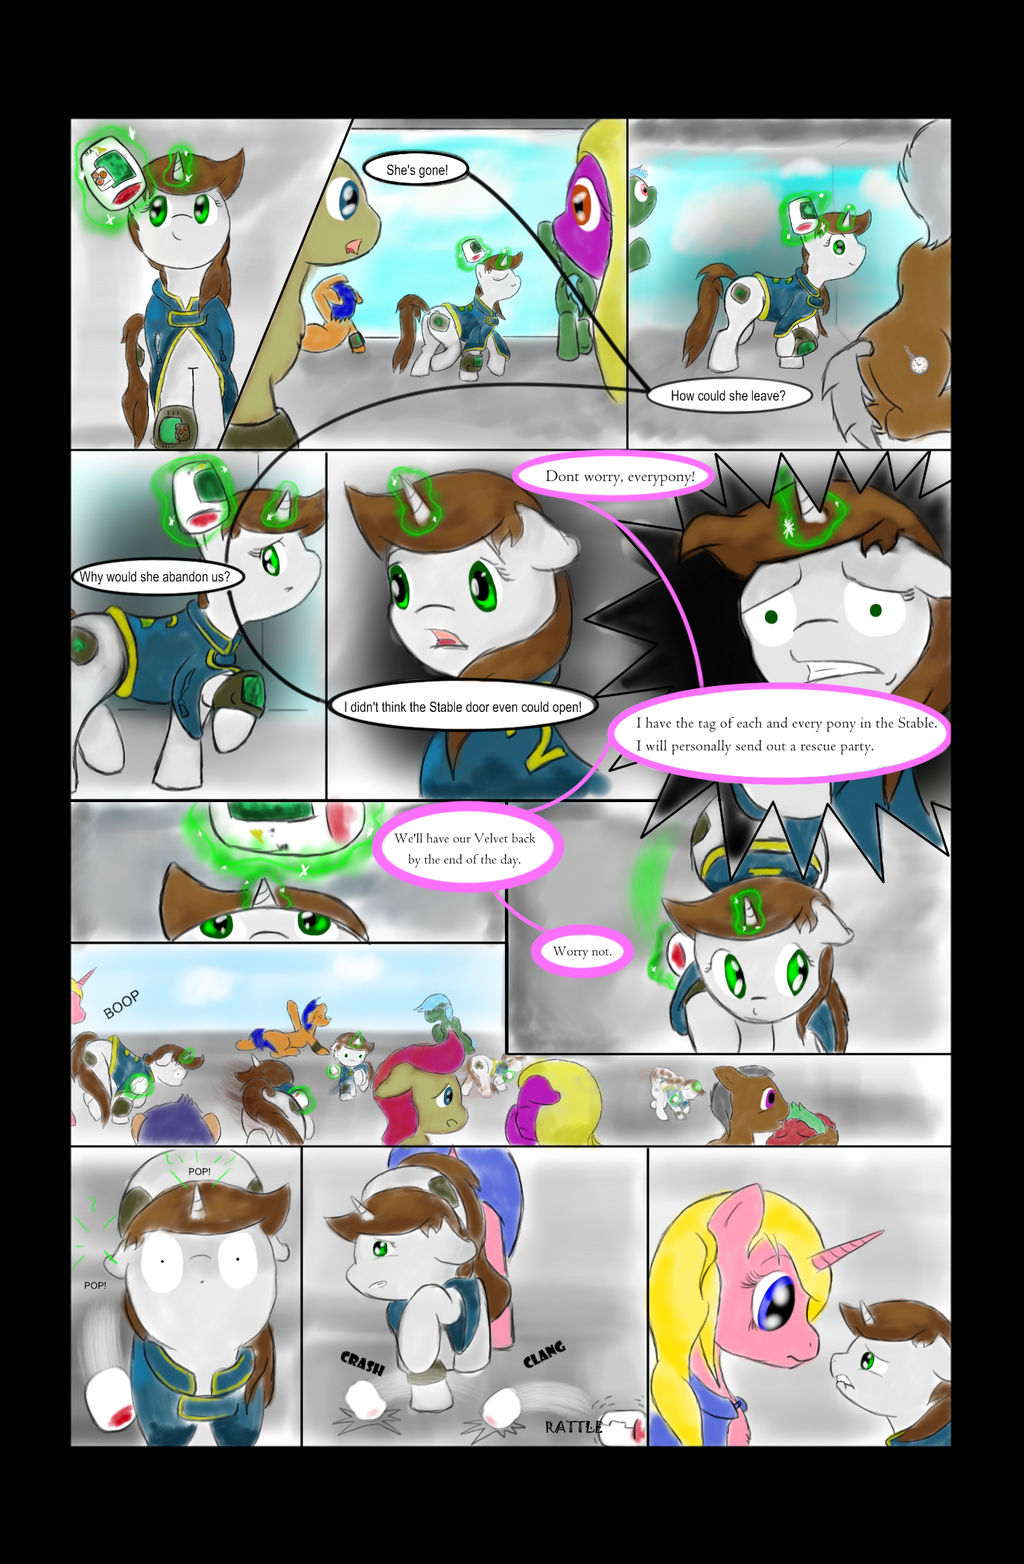 CH 1 Out of the Stable: PG 10